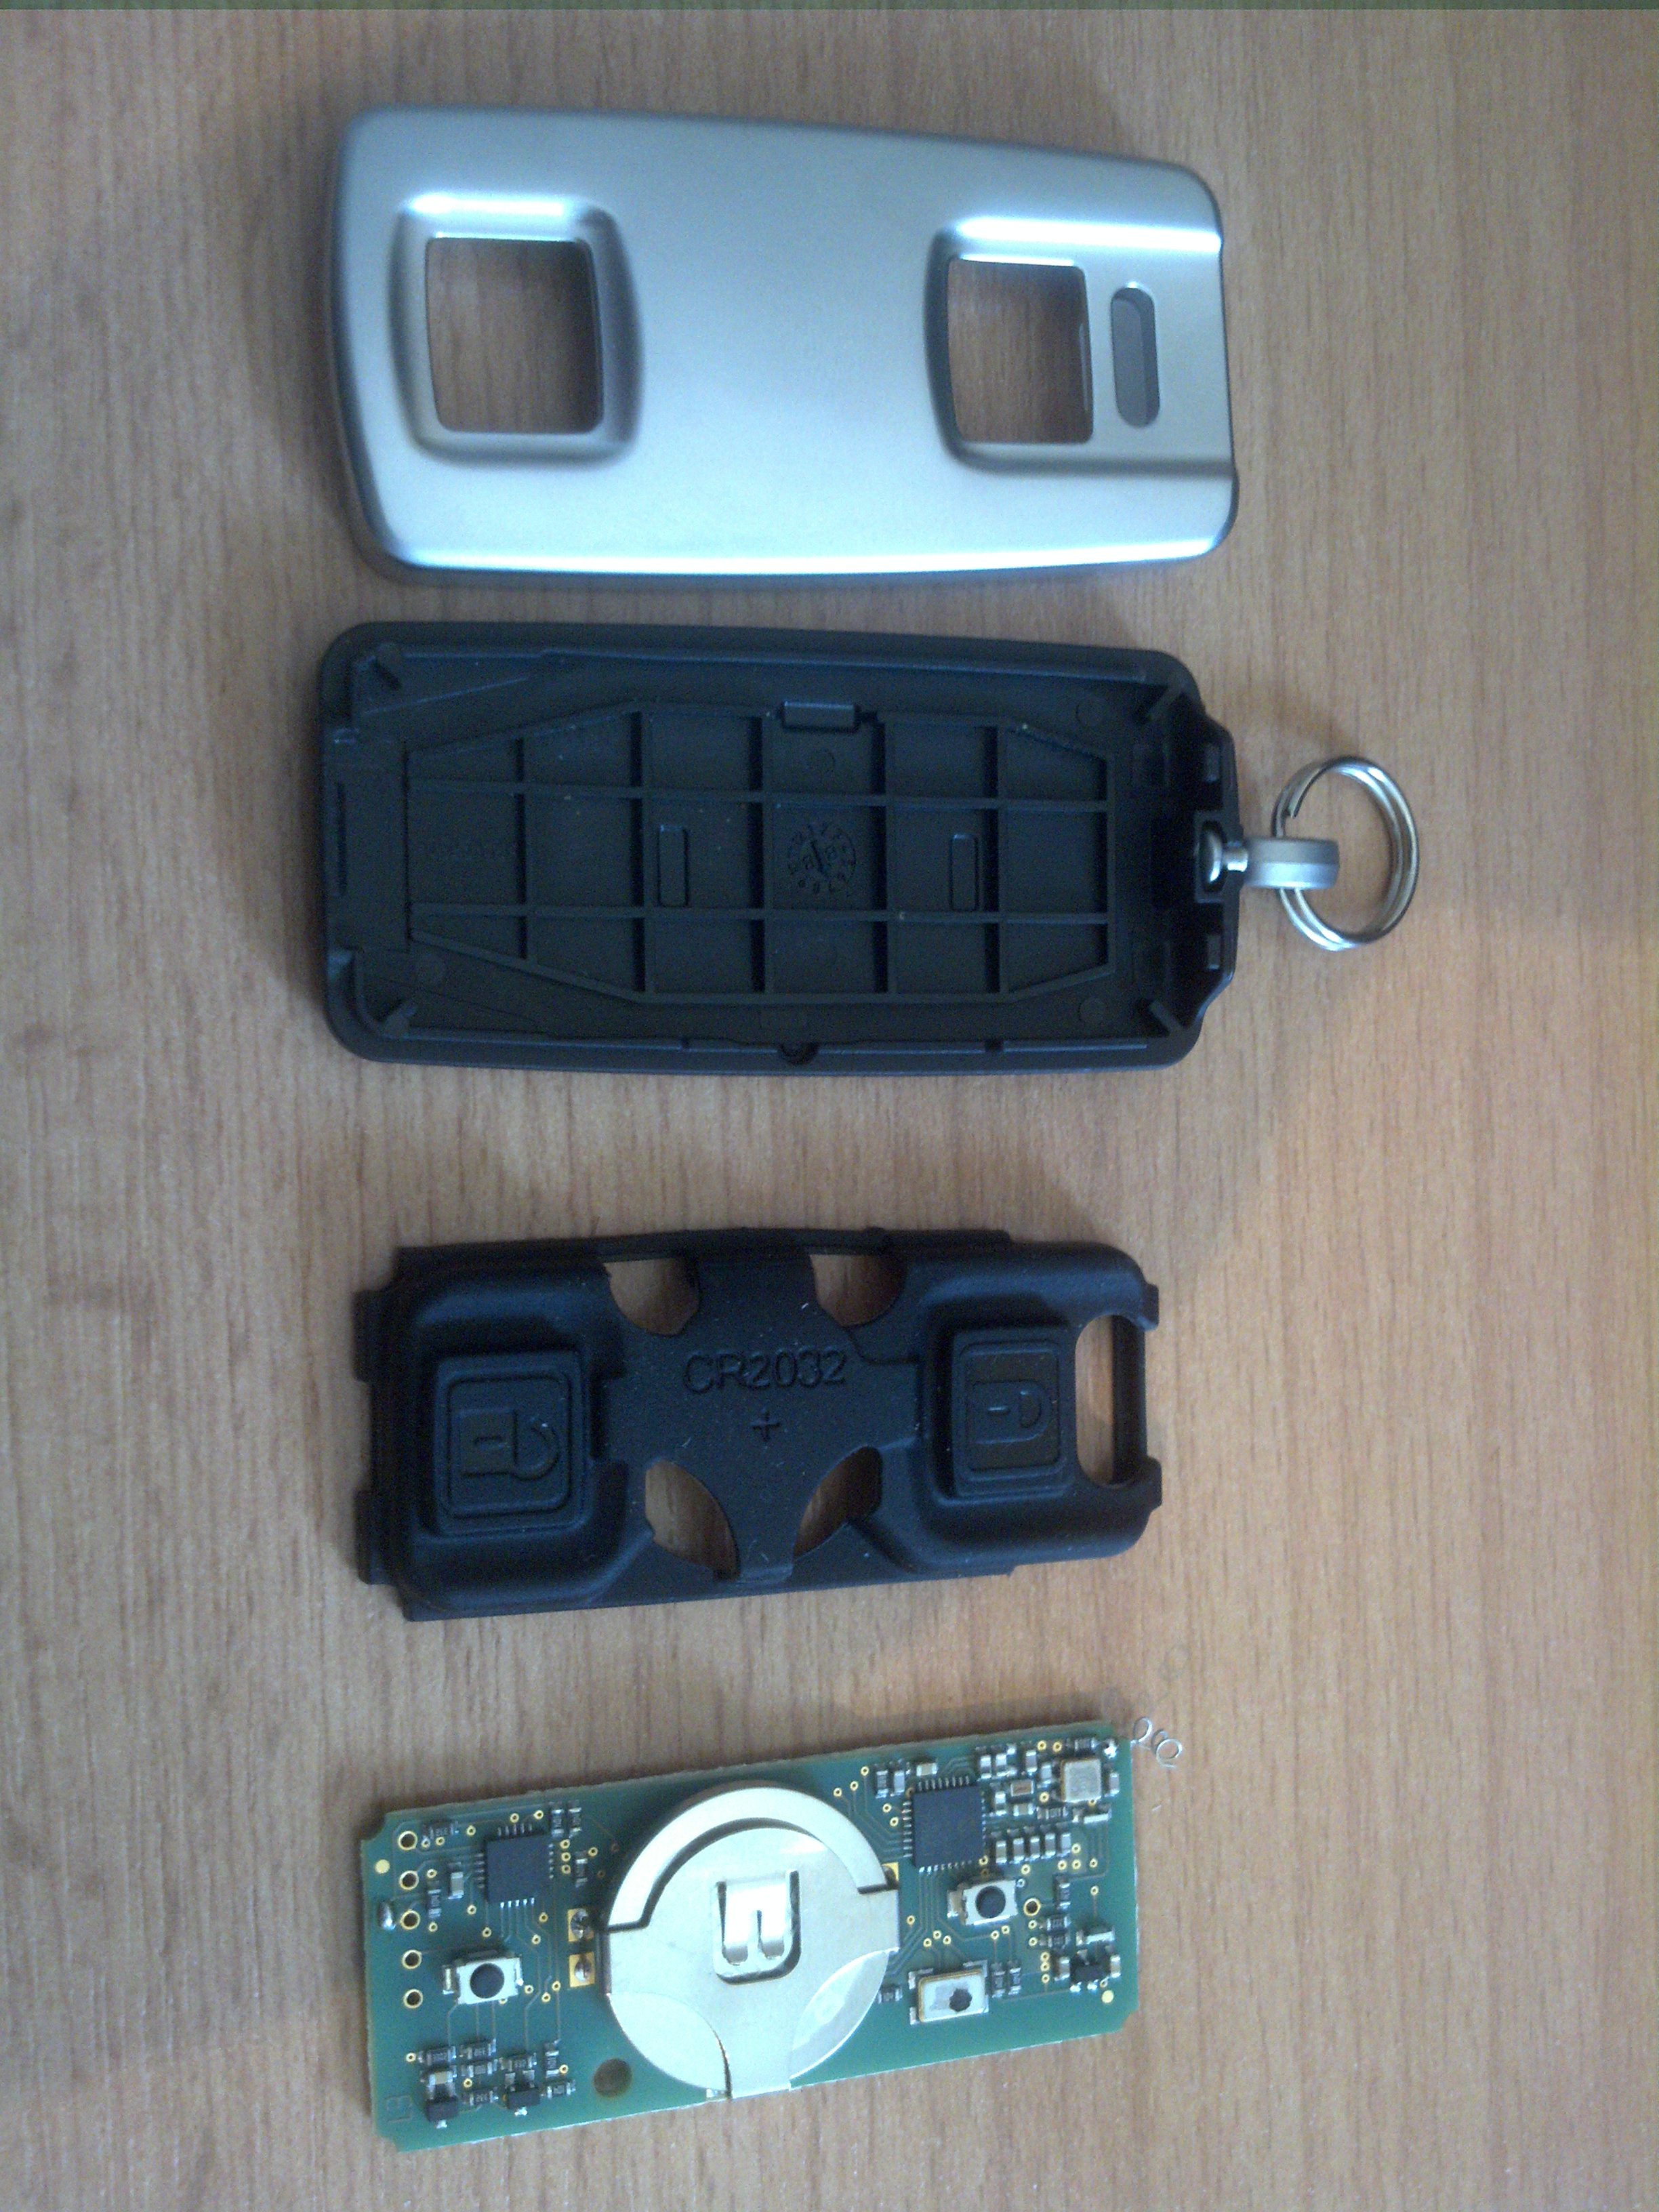 Disassembled CFF3000